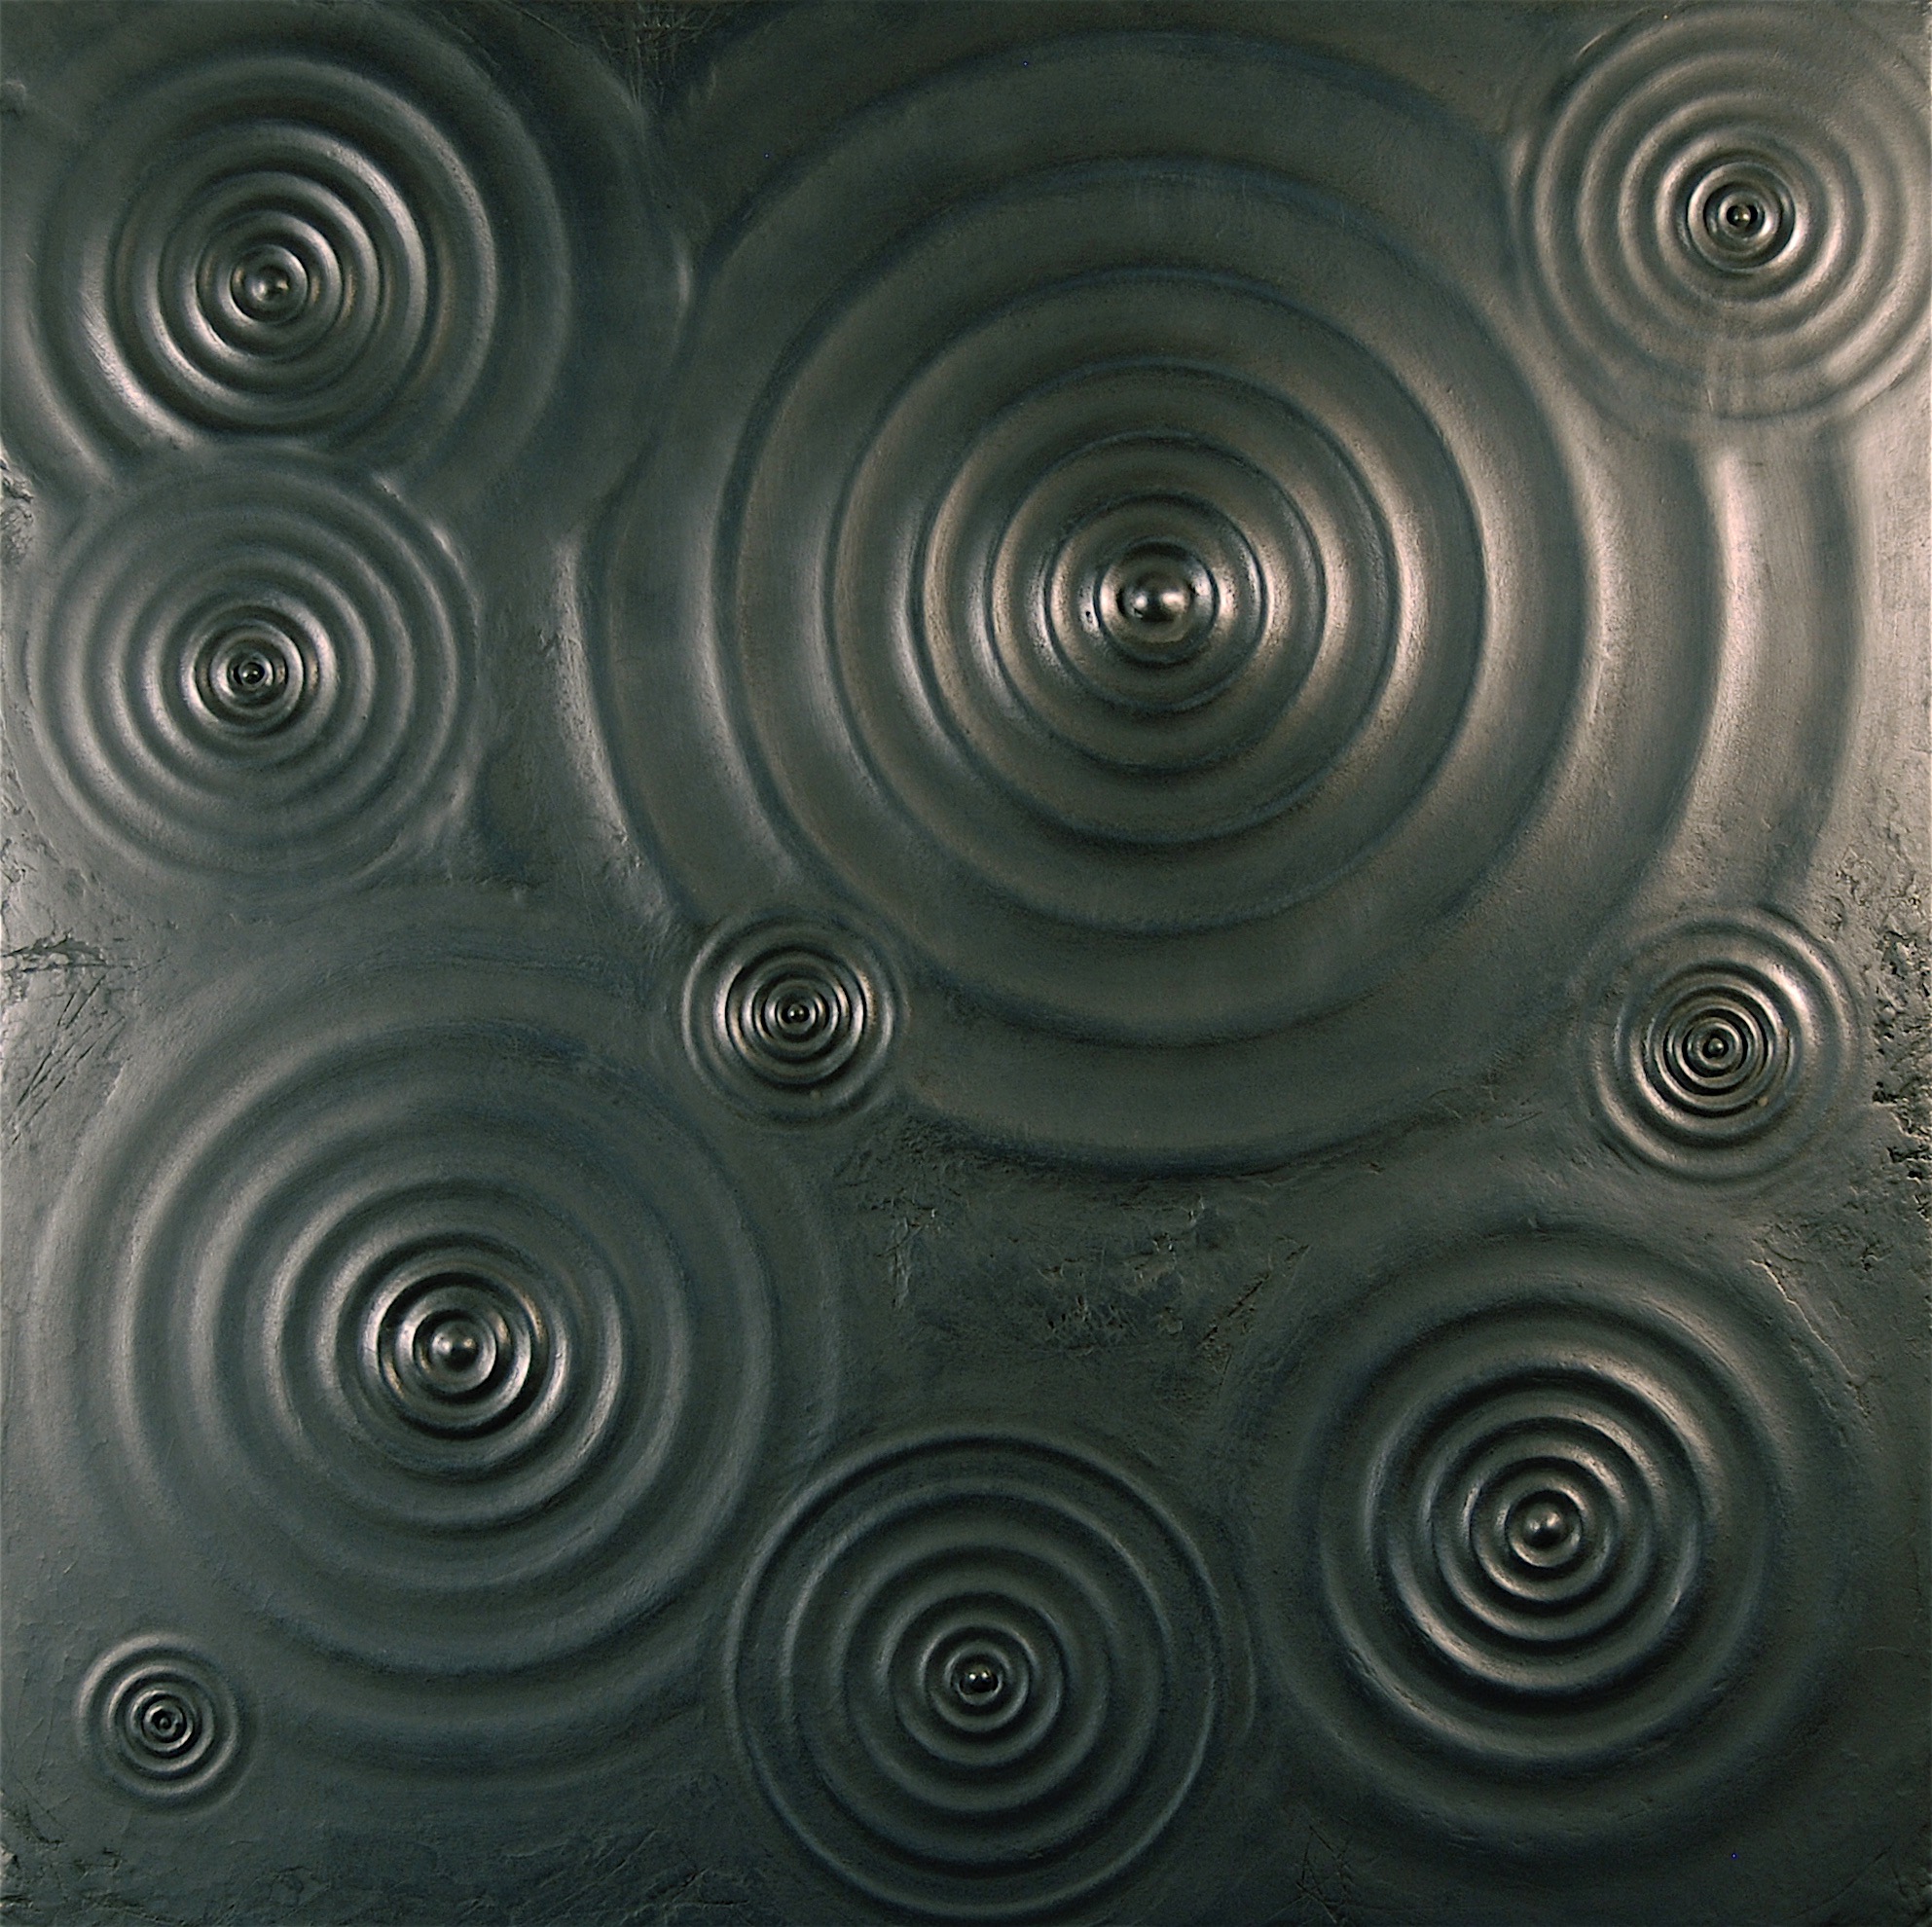 Thomas Coffin - Ripple Effect #2 (graphite), 36"h x 36"w x 2"d, mixed media sculptural wall relief